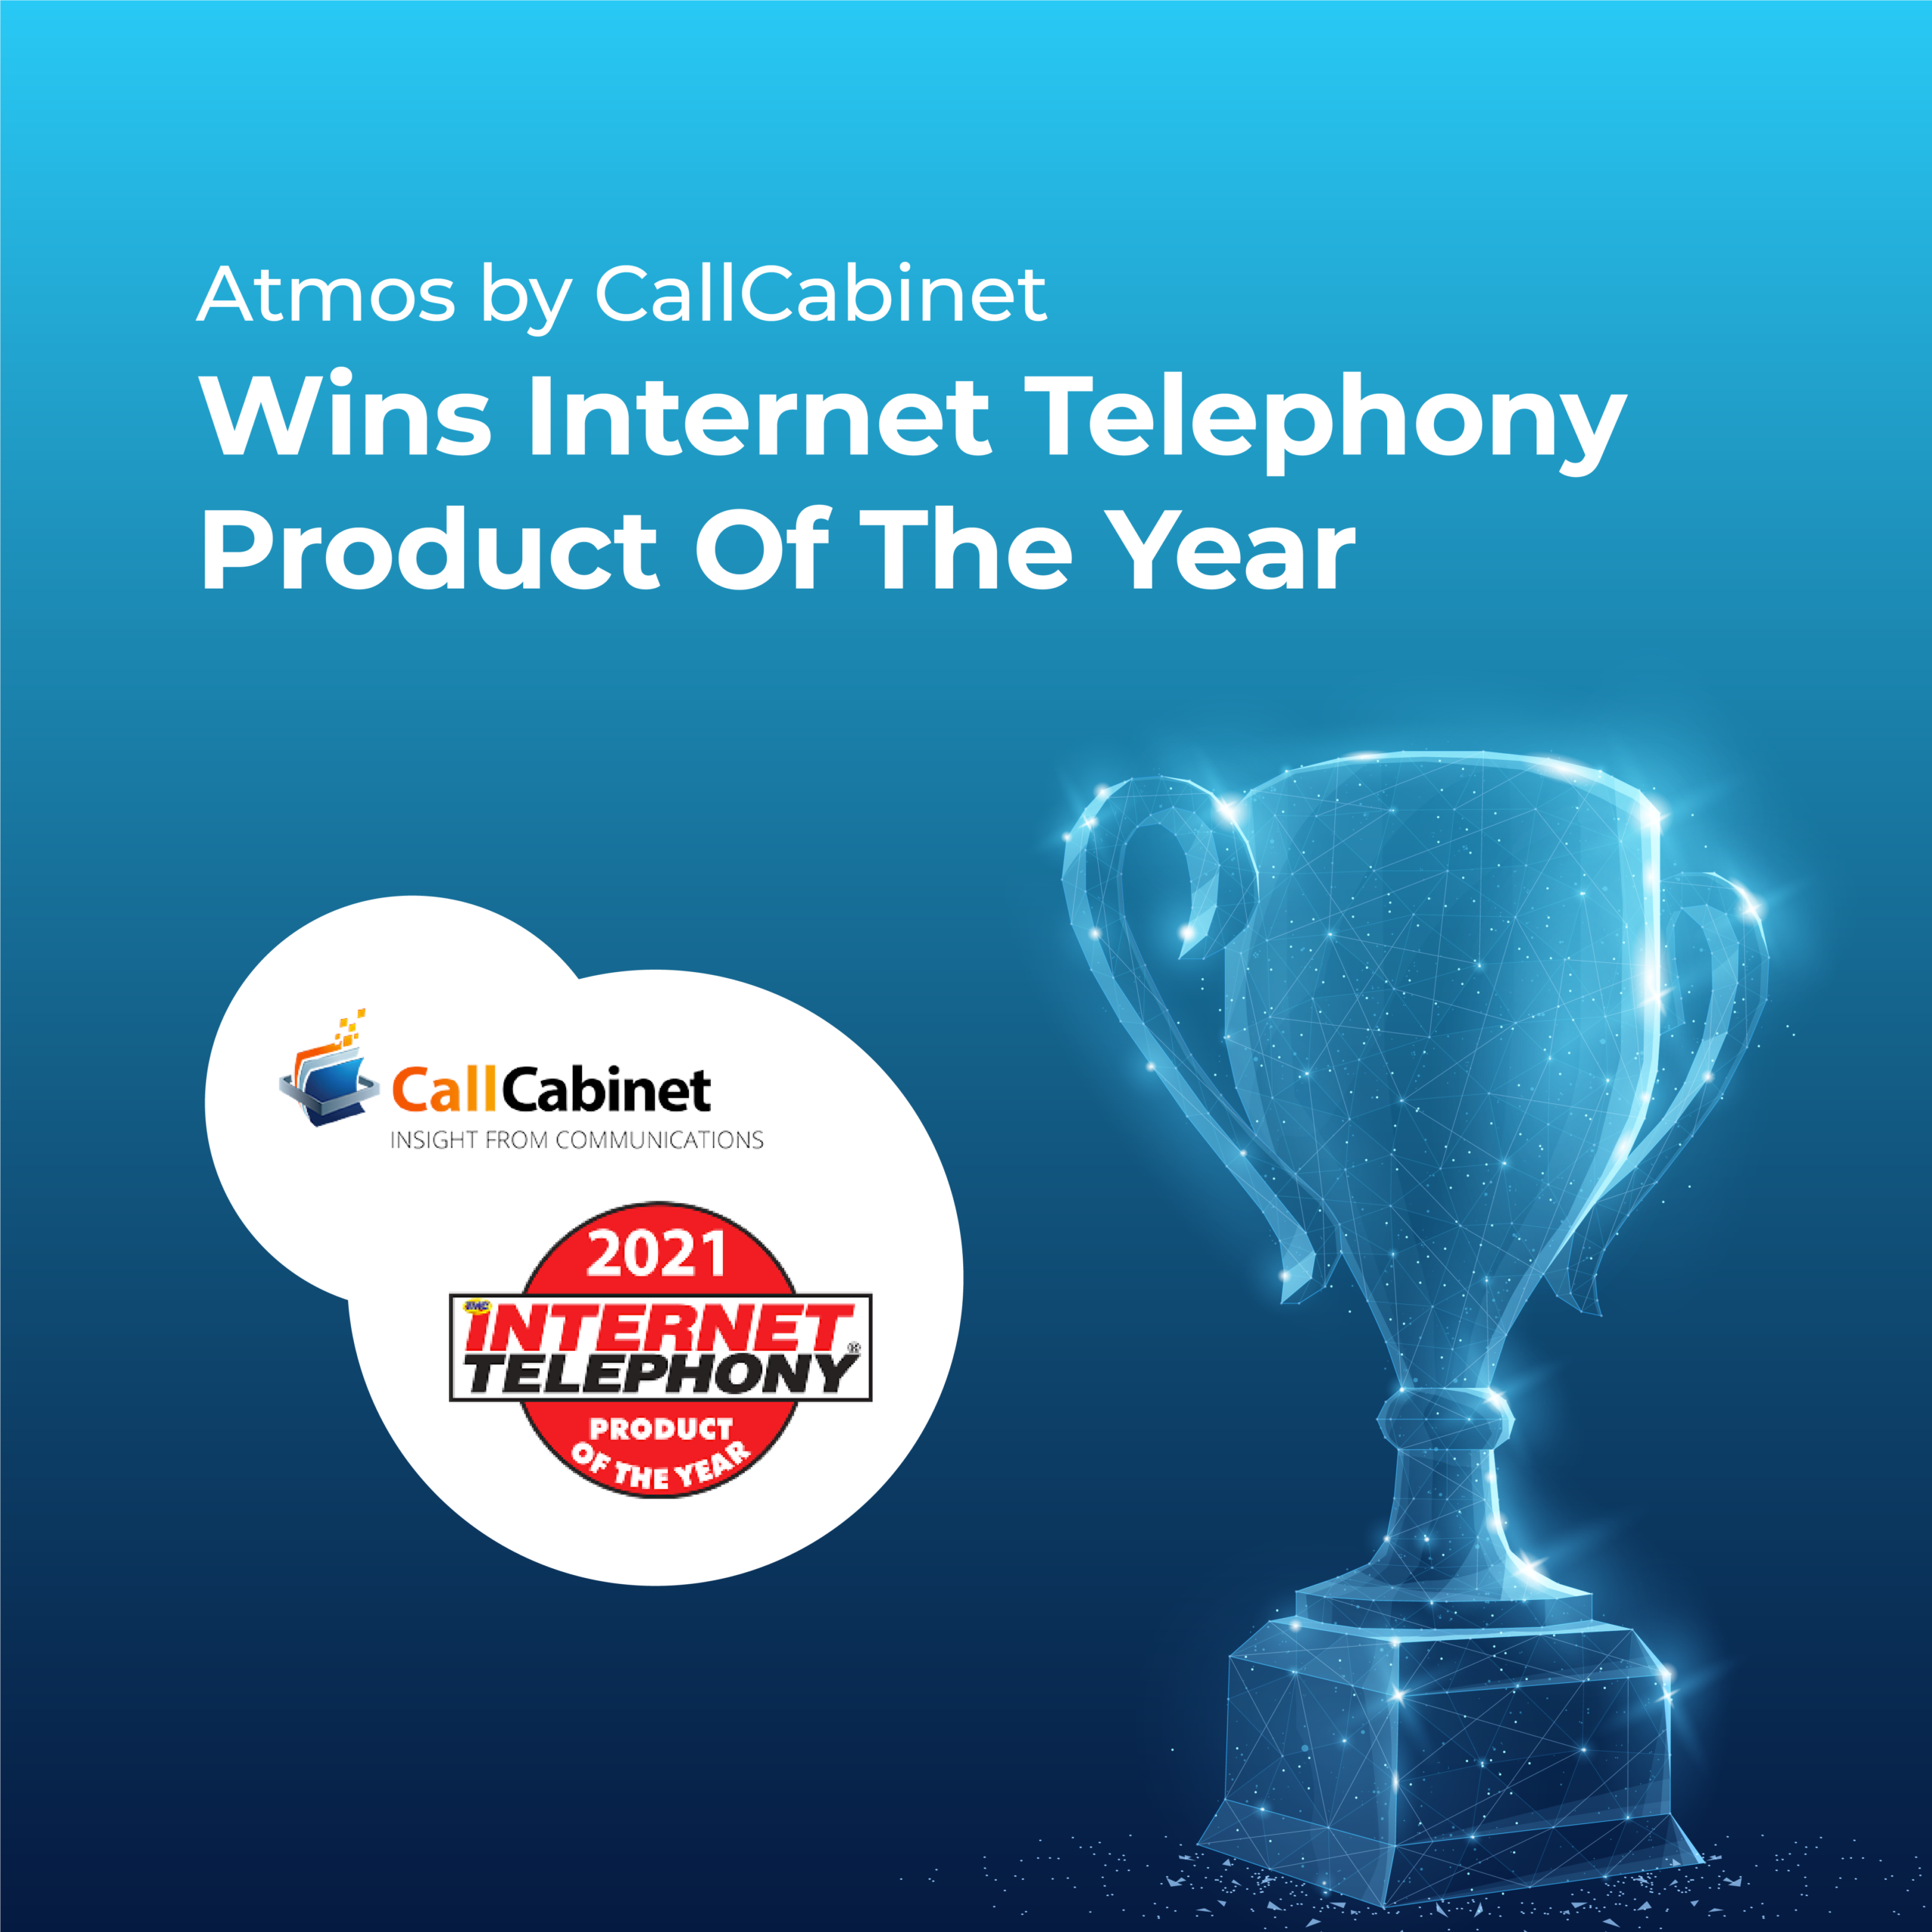 Atmos by CallCabinet Wins Internet Telephony Product Of The Year